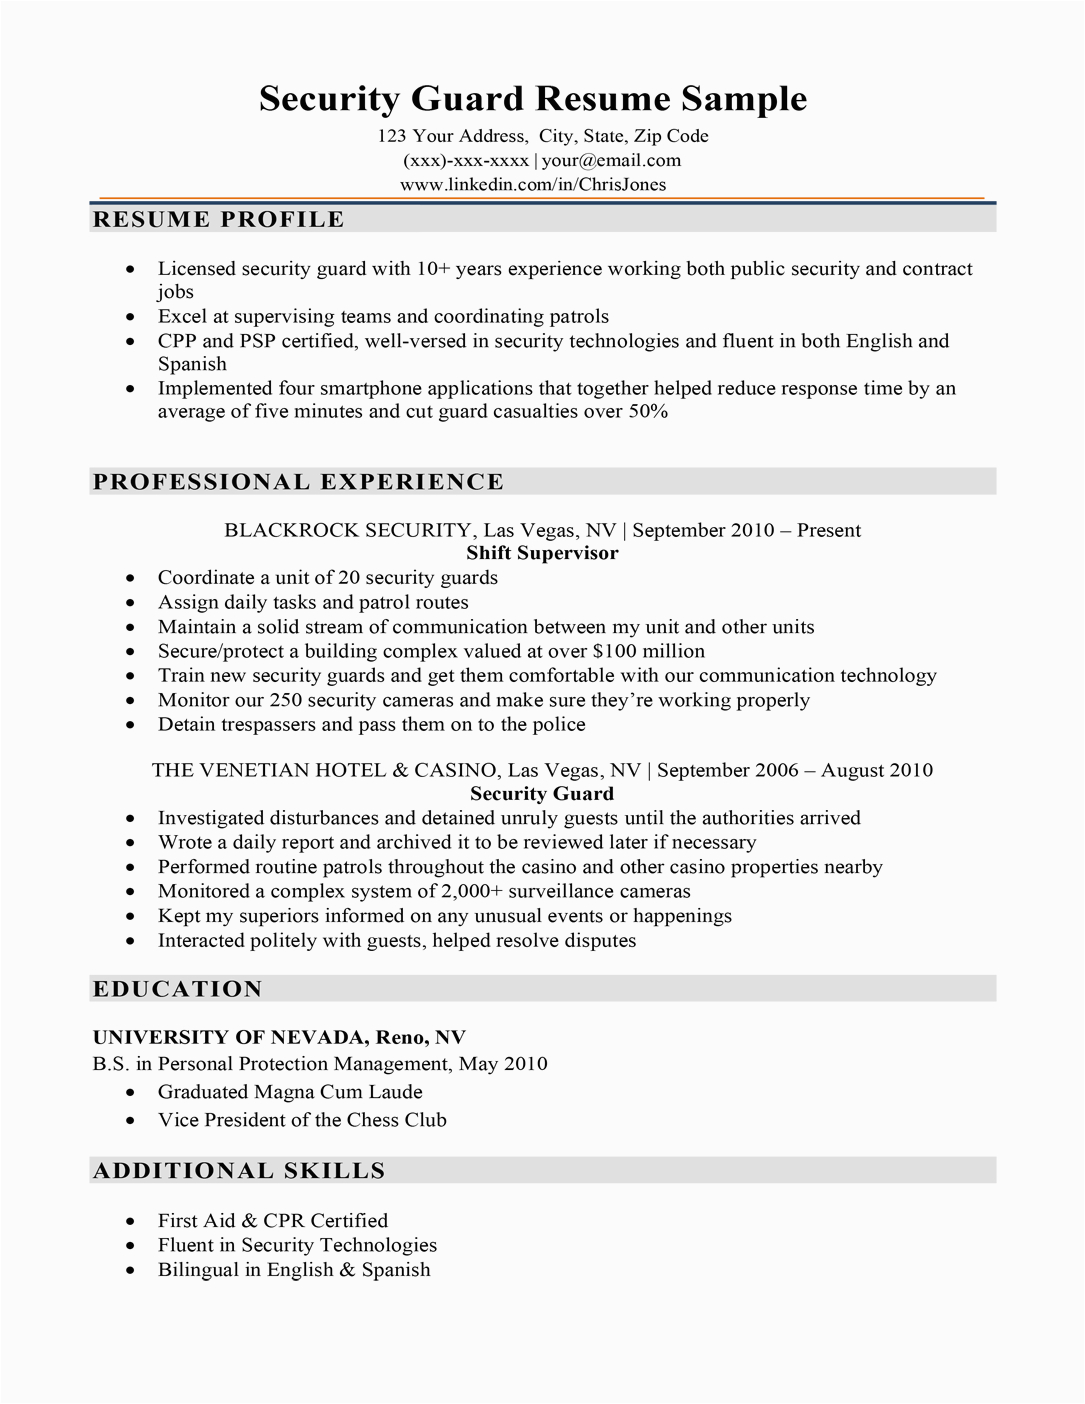 Sample Resume for Security Officer Position Security Guard Resume Sample & Writing Tips